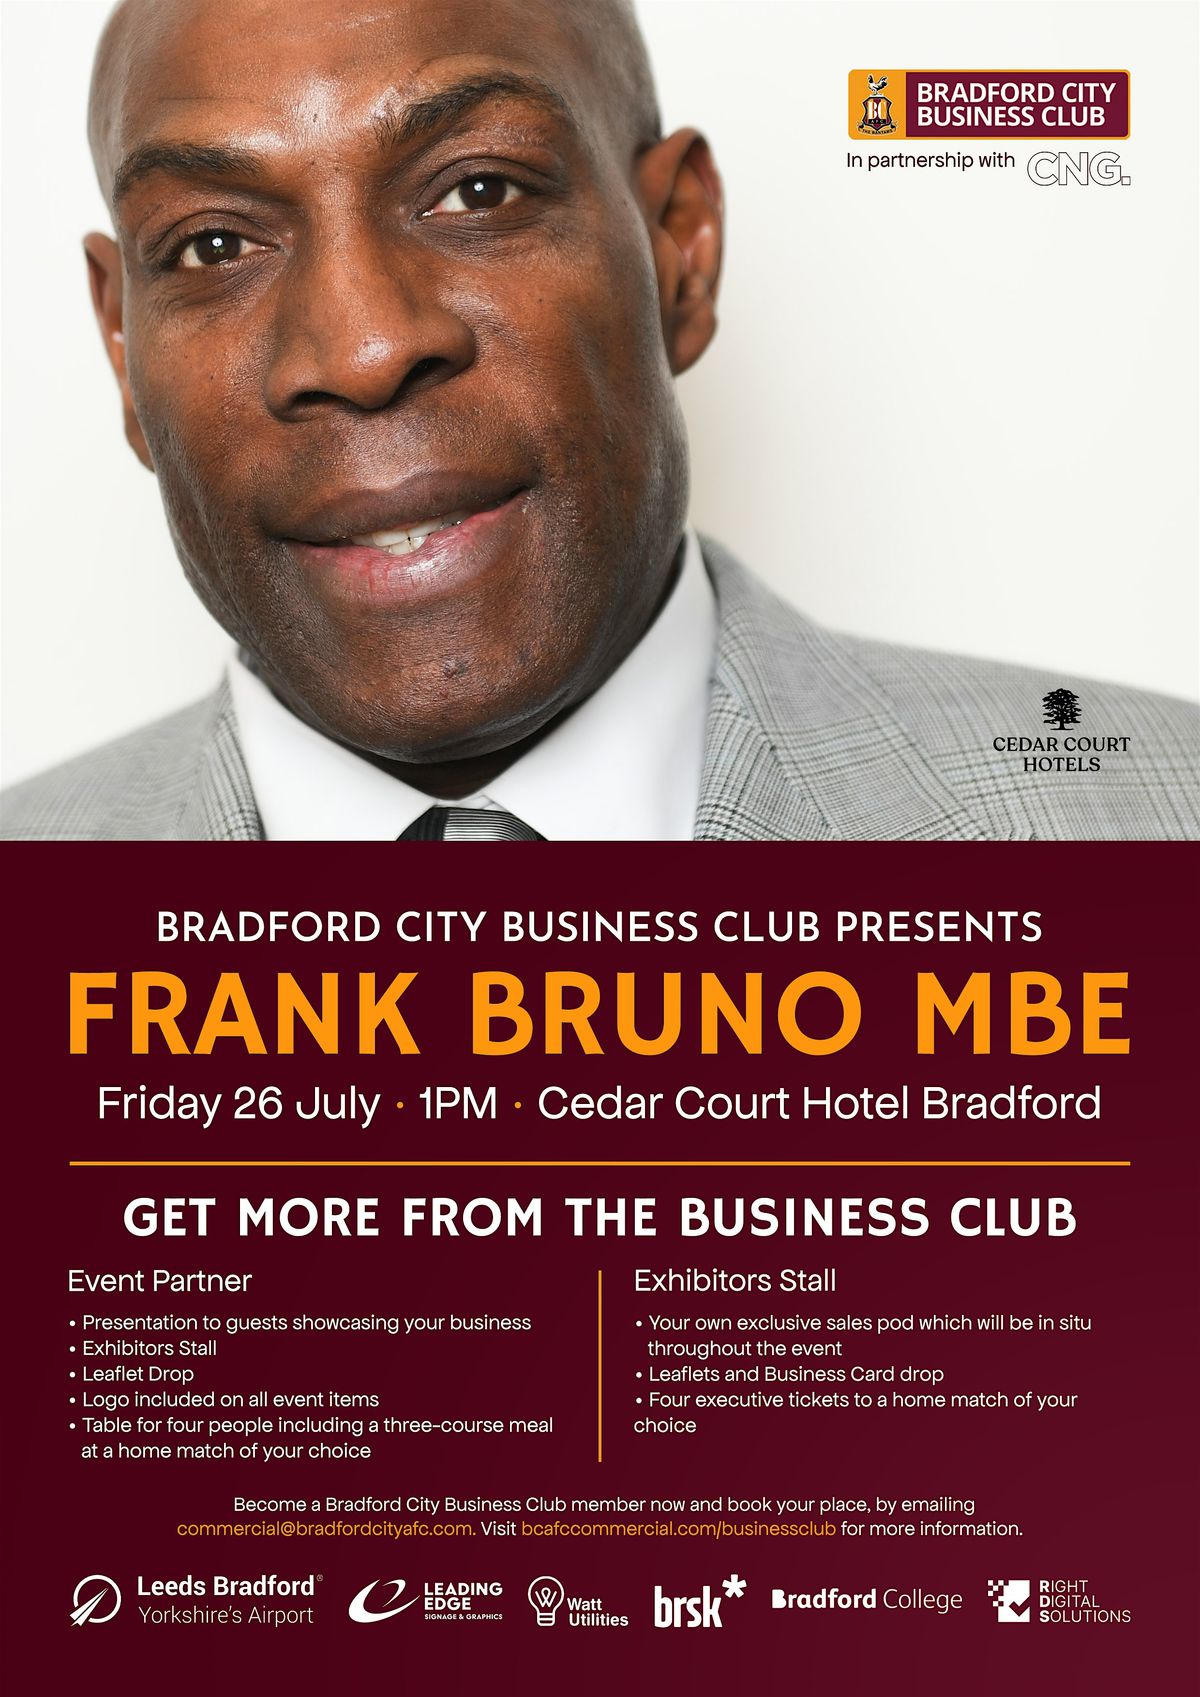 Bradford City Business Club in partnership with CNG